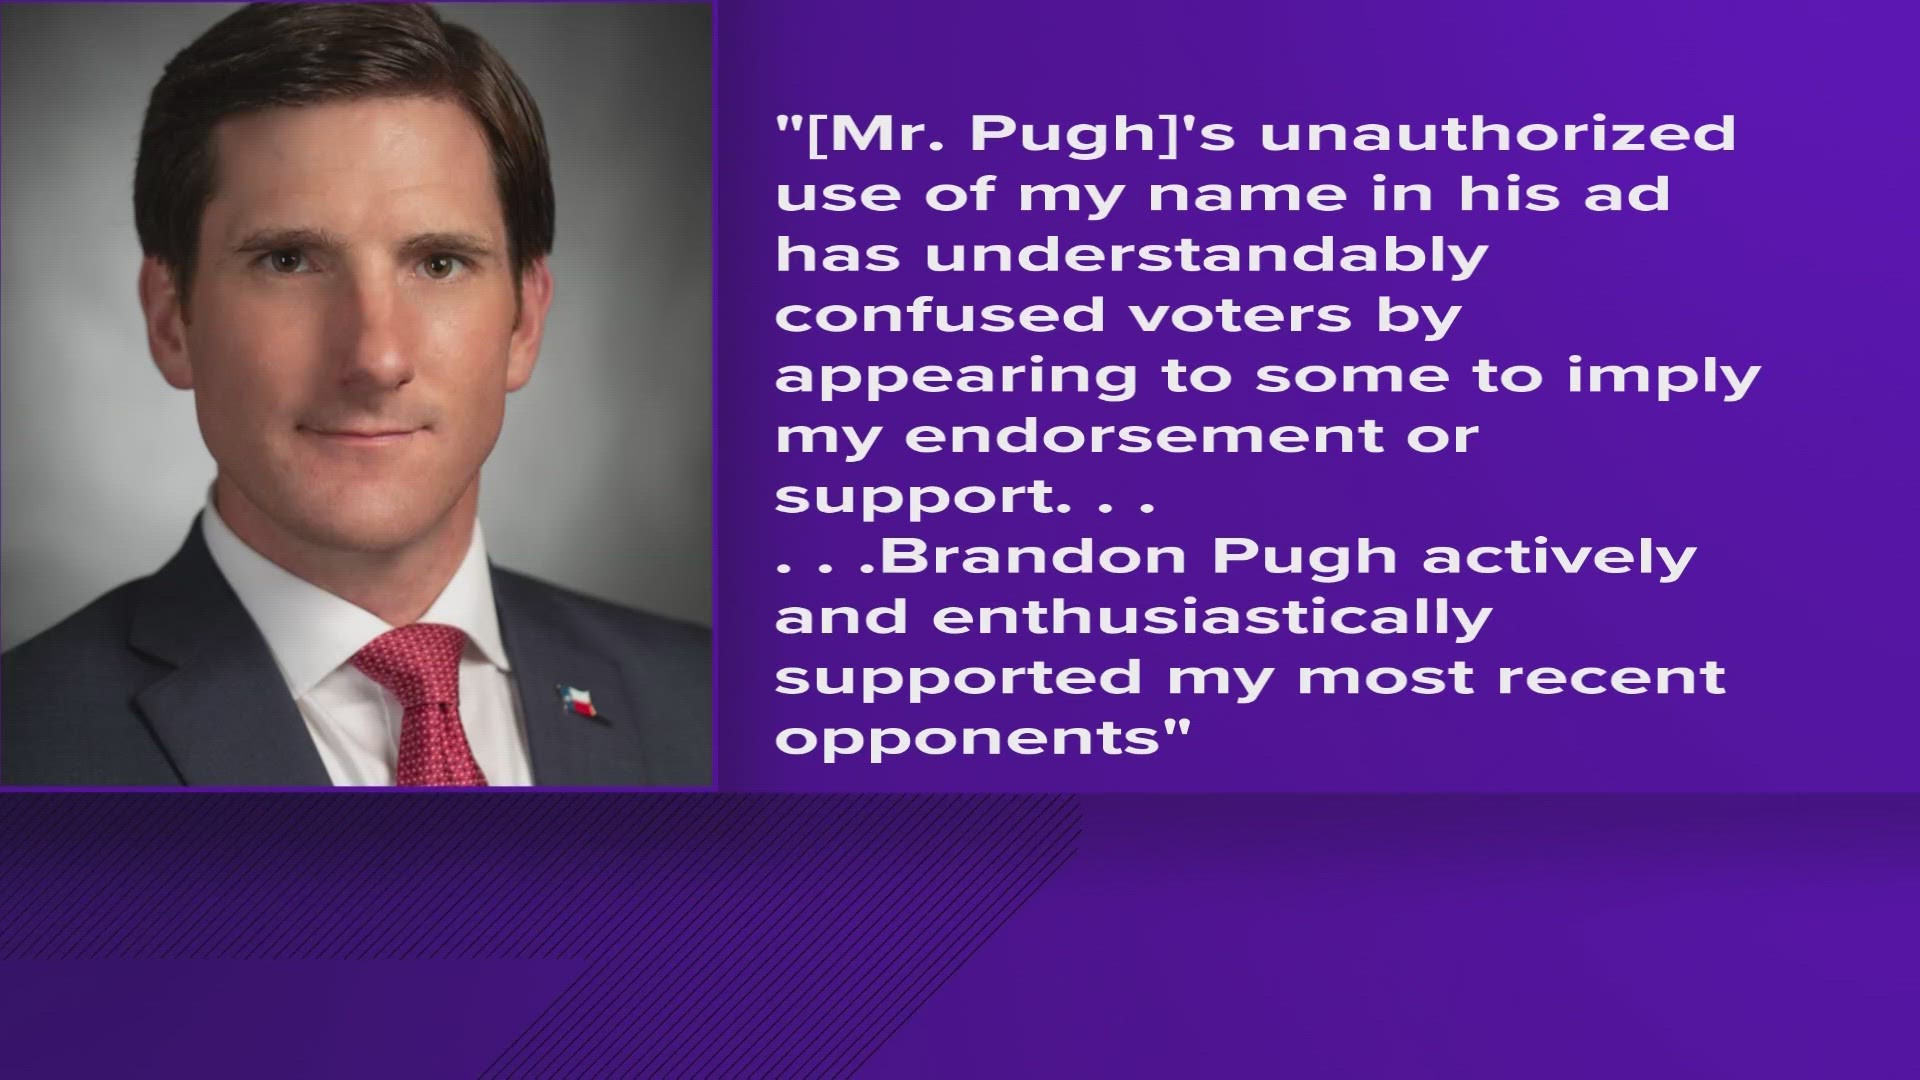 "I appreciate Mr. Pugh working to clear up the confusion on this issue," State Representative Brooks Landgraf said on Facebook.